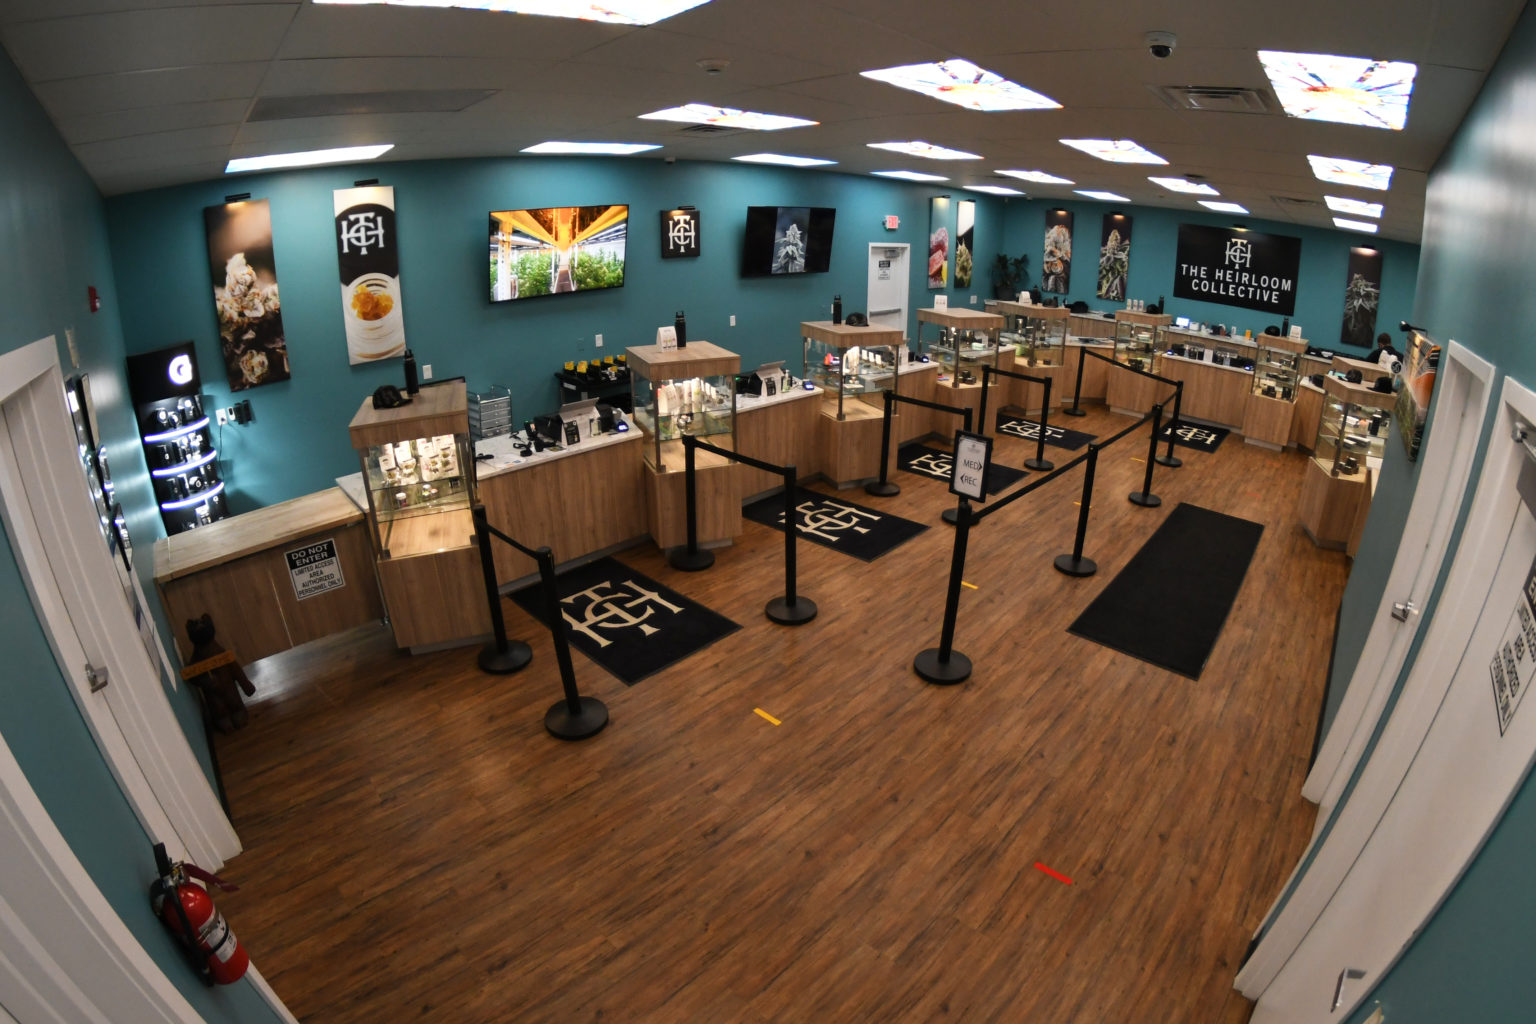 Overhead View of the Sales Floor at Heirloom Collective's Hadley Dispensary - Photo Credit: Heirloom Collective